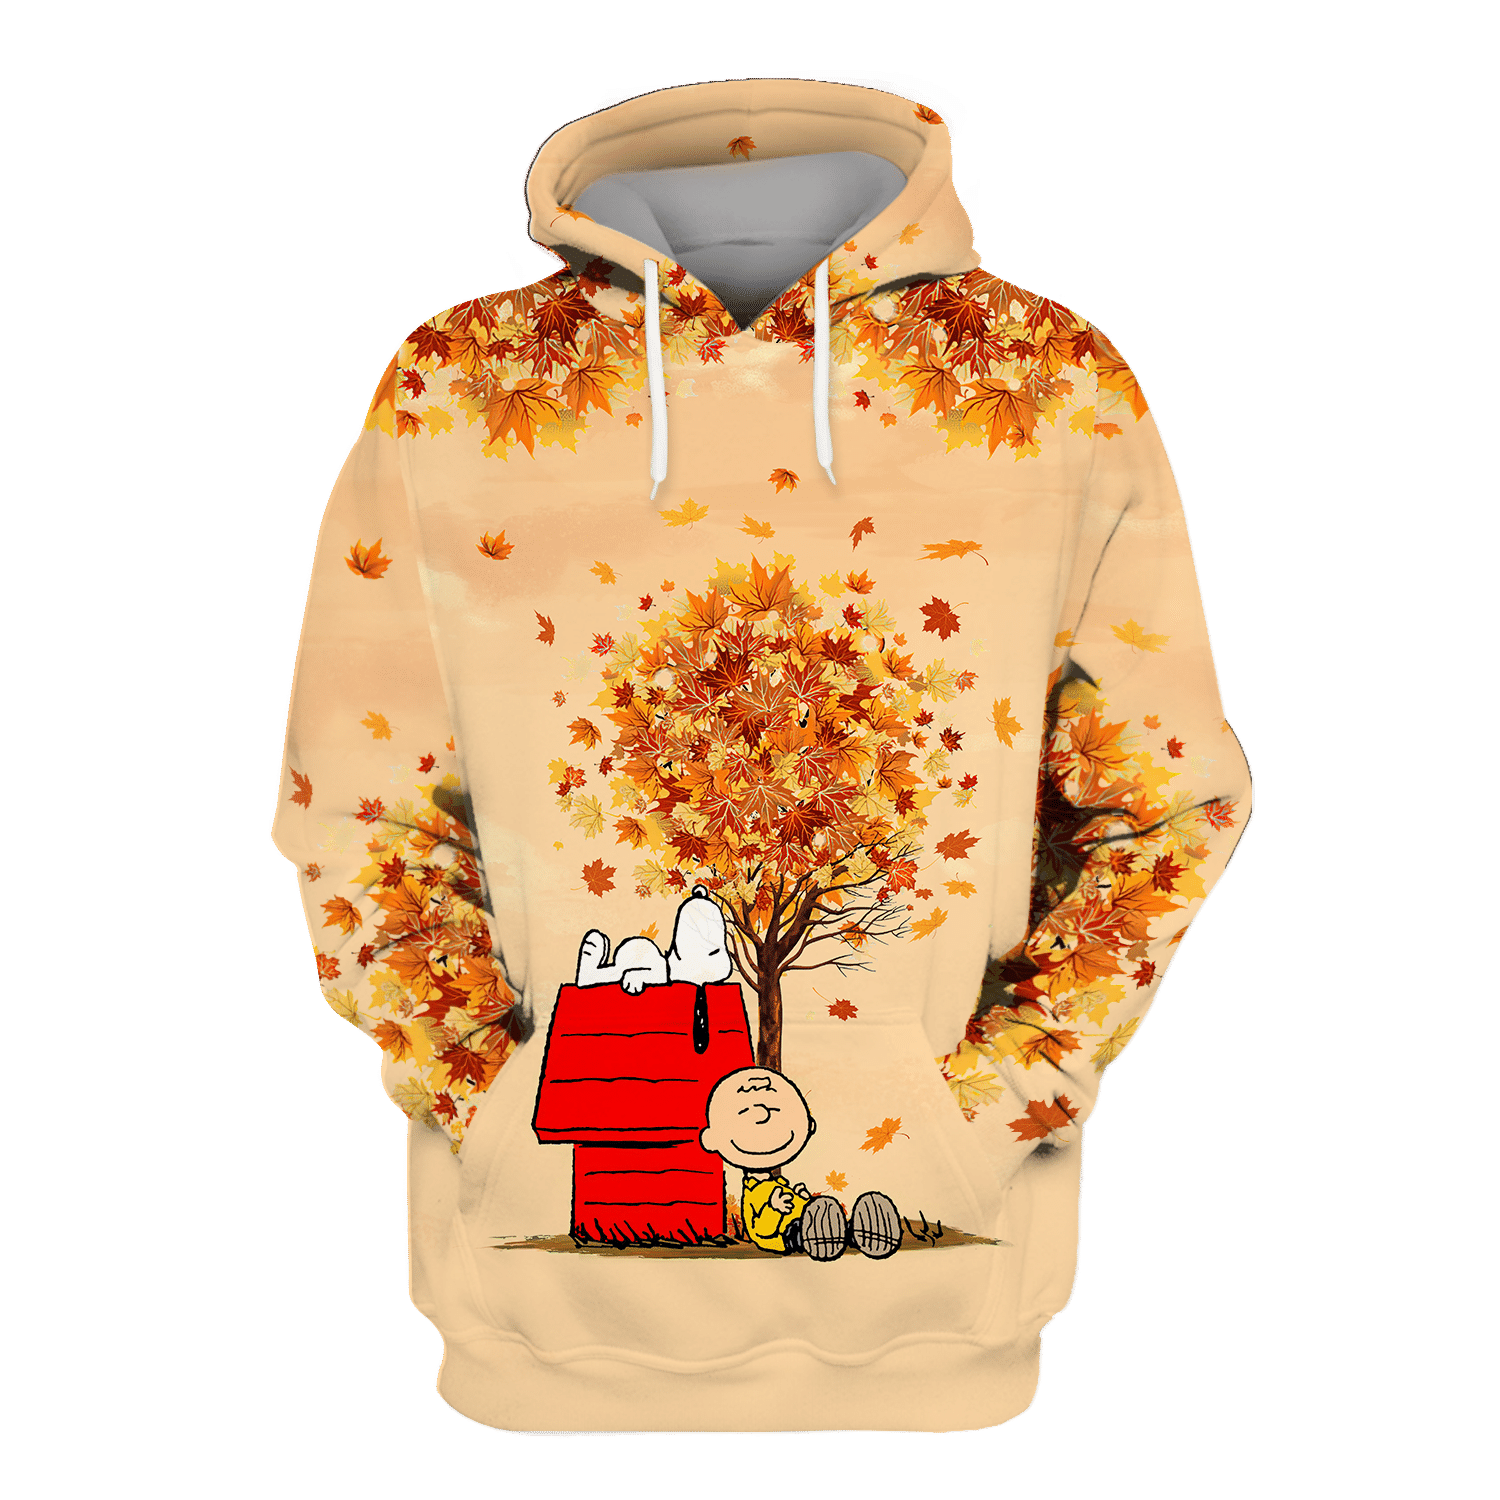 Snoopy and Charlie Brown autumn time hoodie and shirt 2